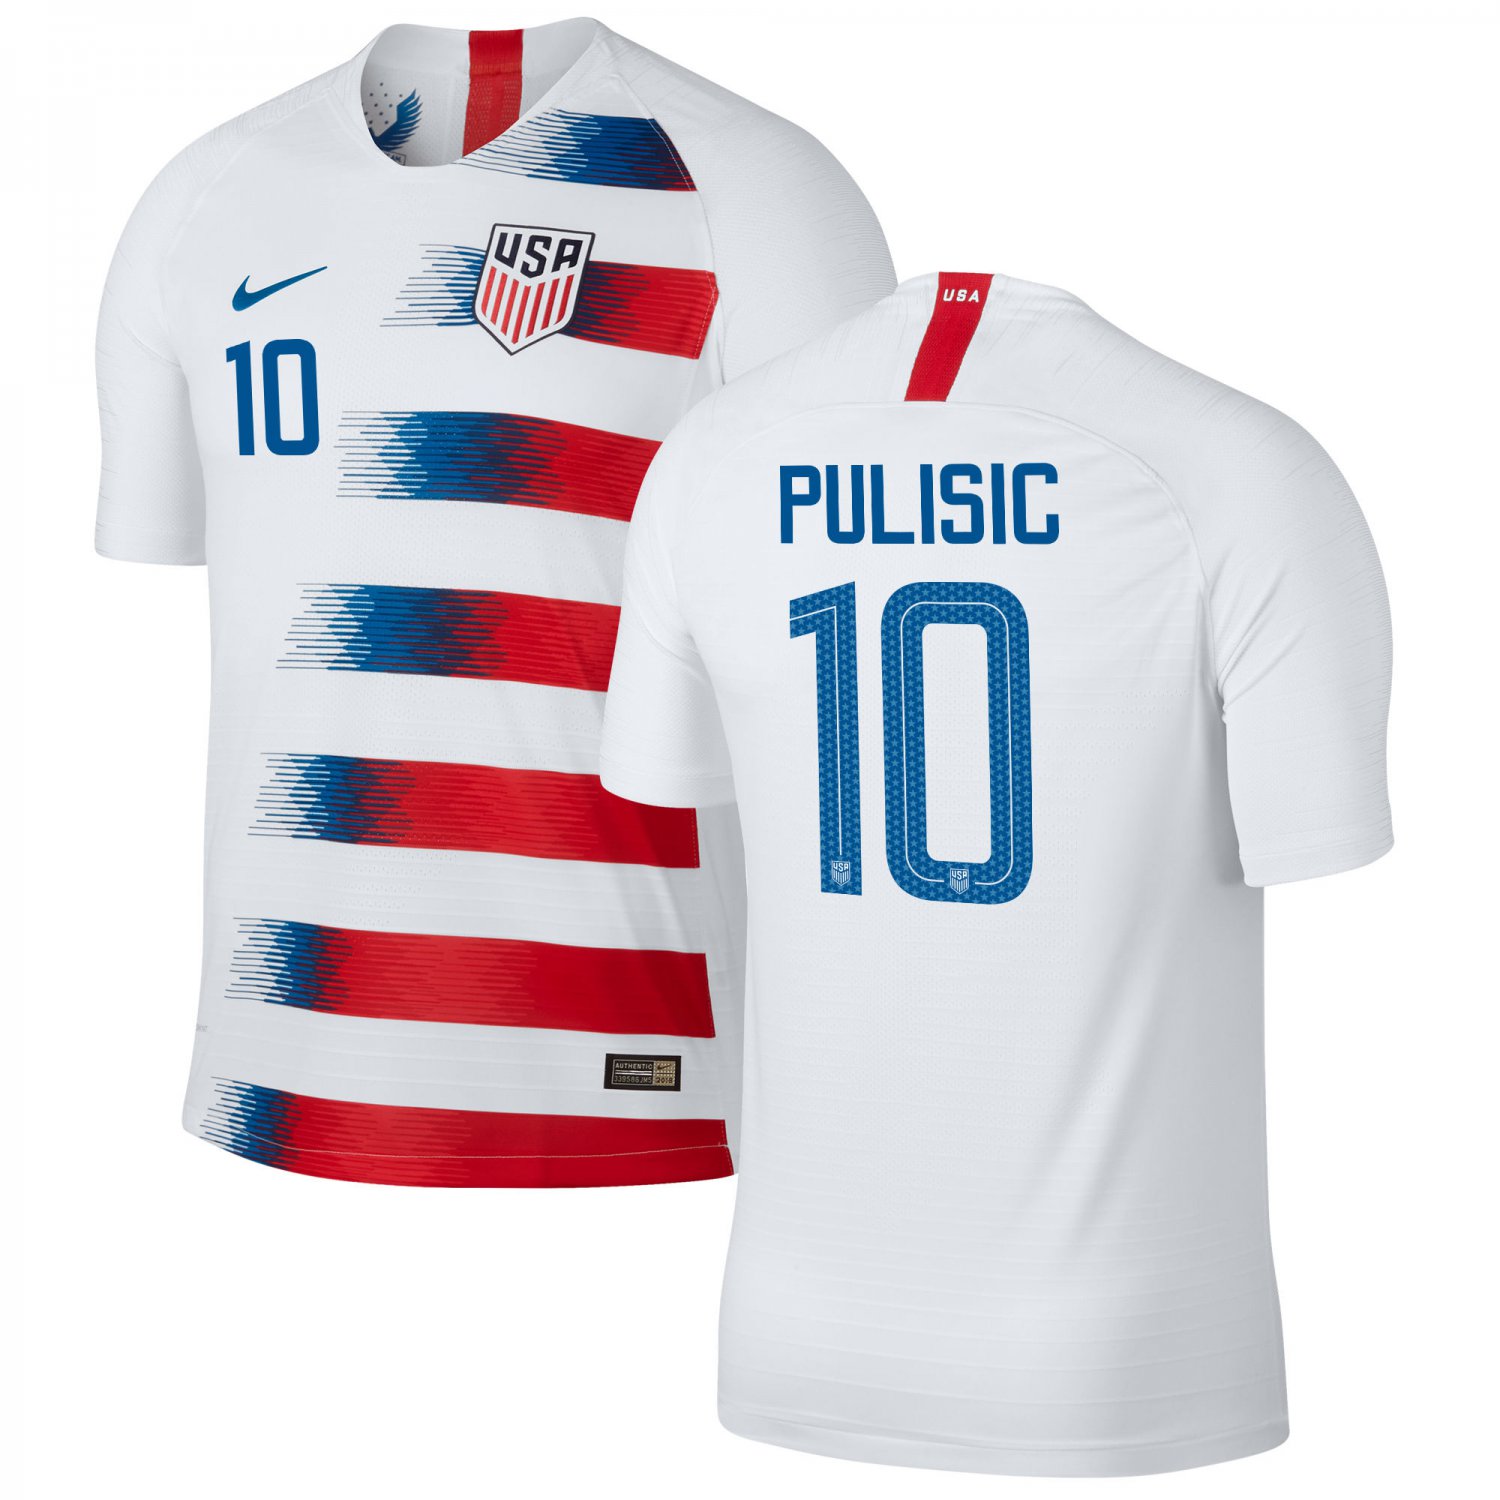 Christian Pulisic #10 USMNT USA Home 20182019 SOCCER Jersey – White